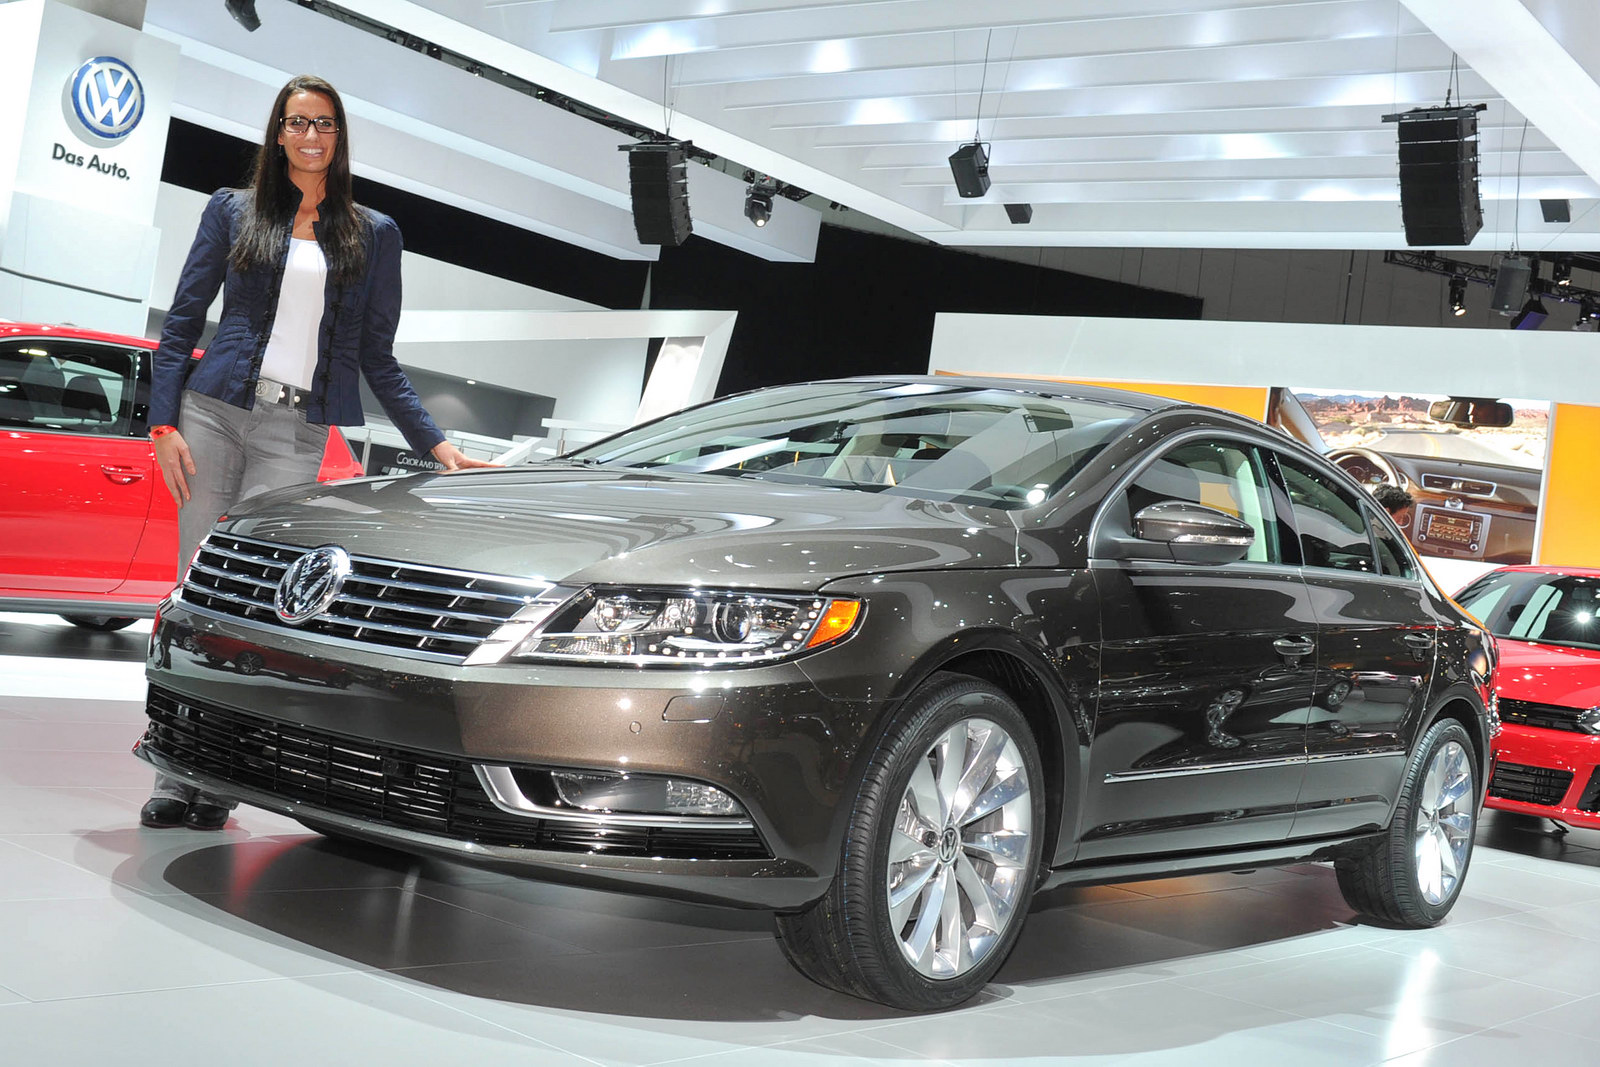 Facelifted 2013 Volkswagen CC Makes its World Premiere at the LA Motor Show